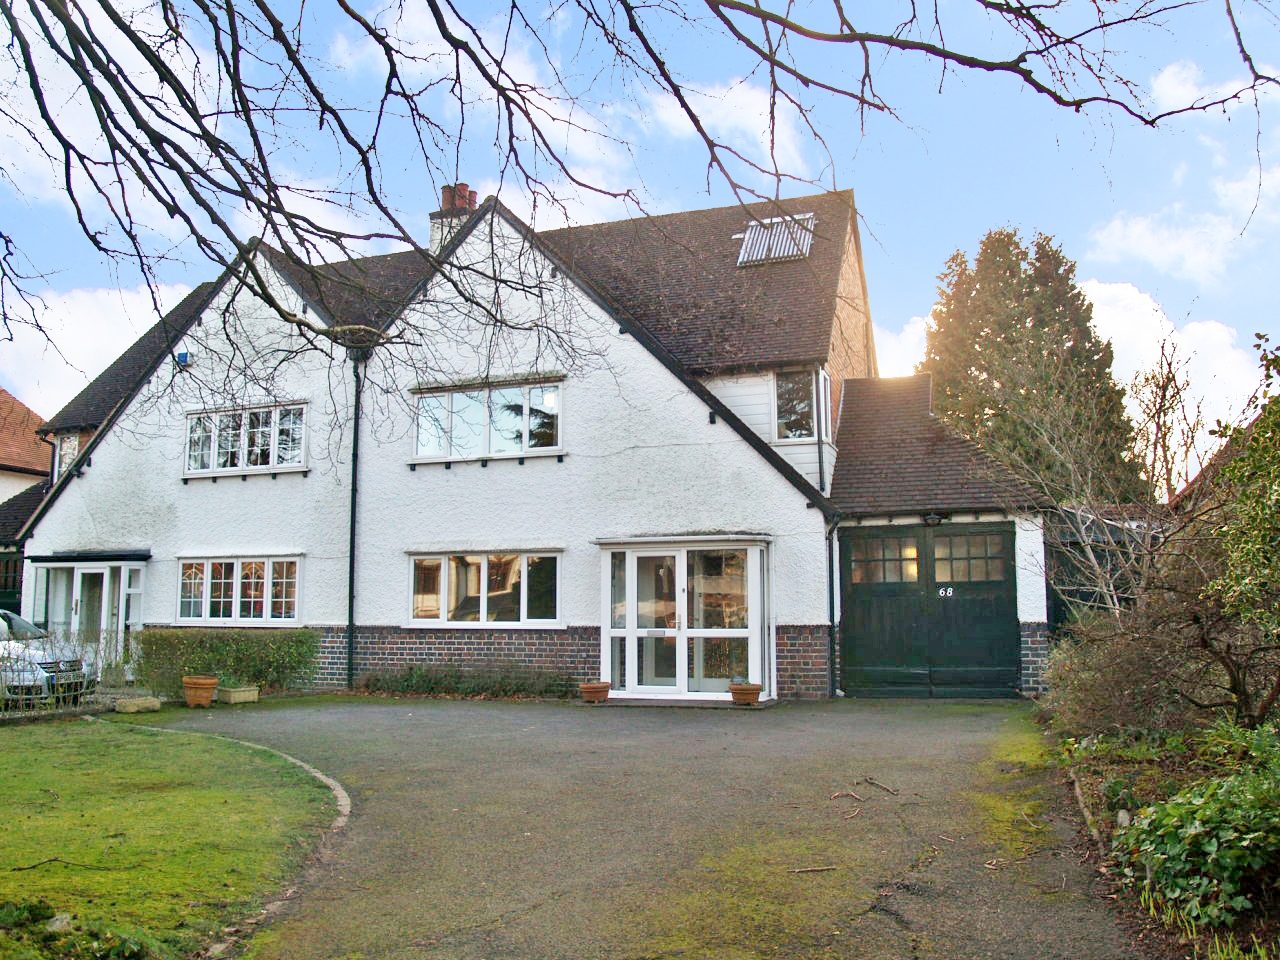 4 bedroom semi detached house SSTC in Solihull - Main Image.